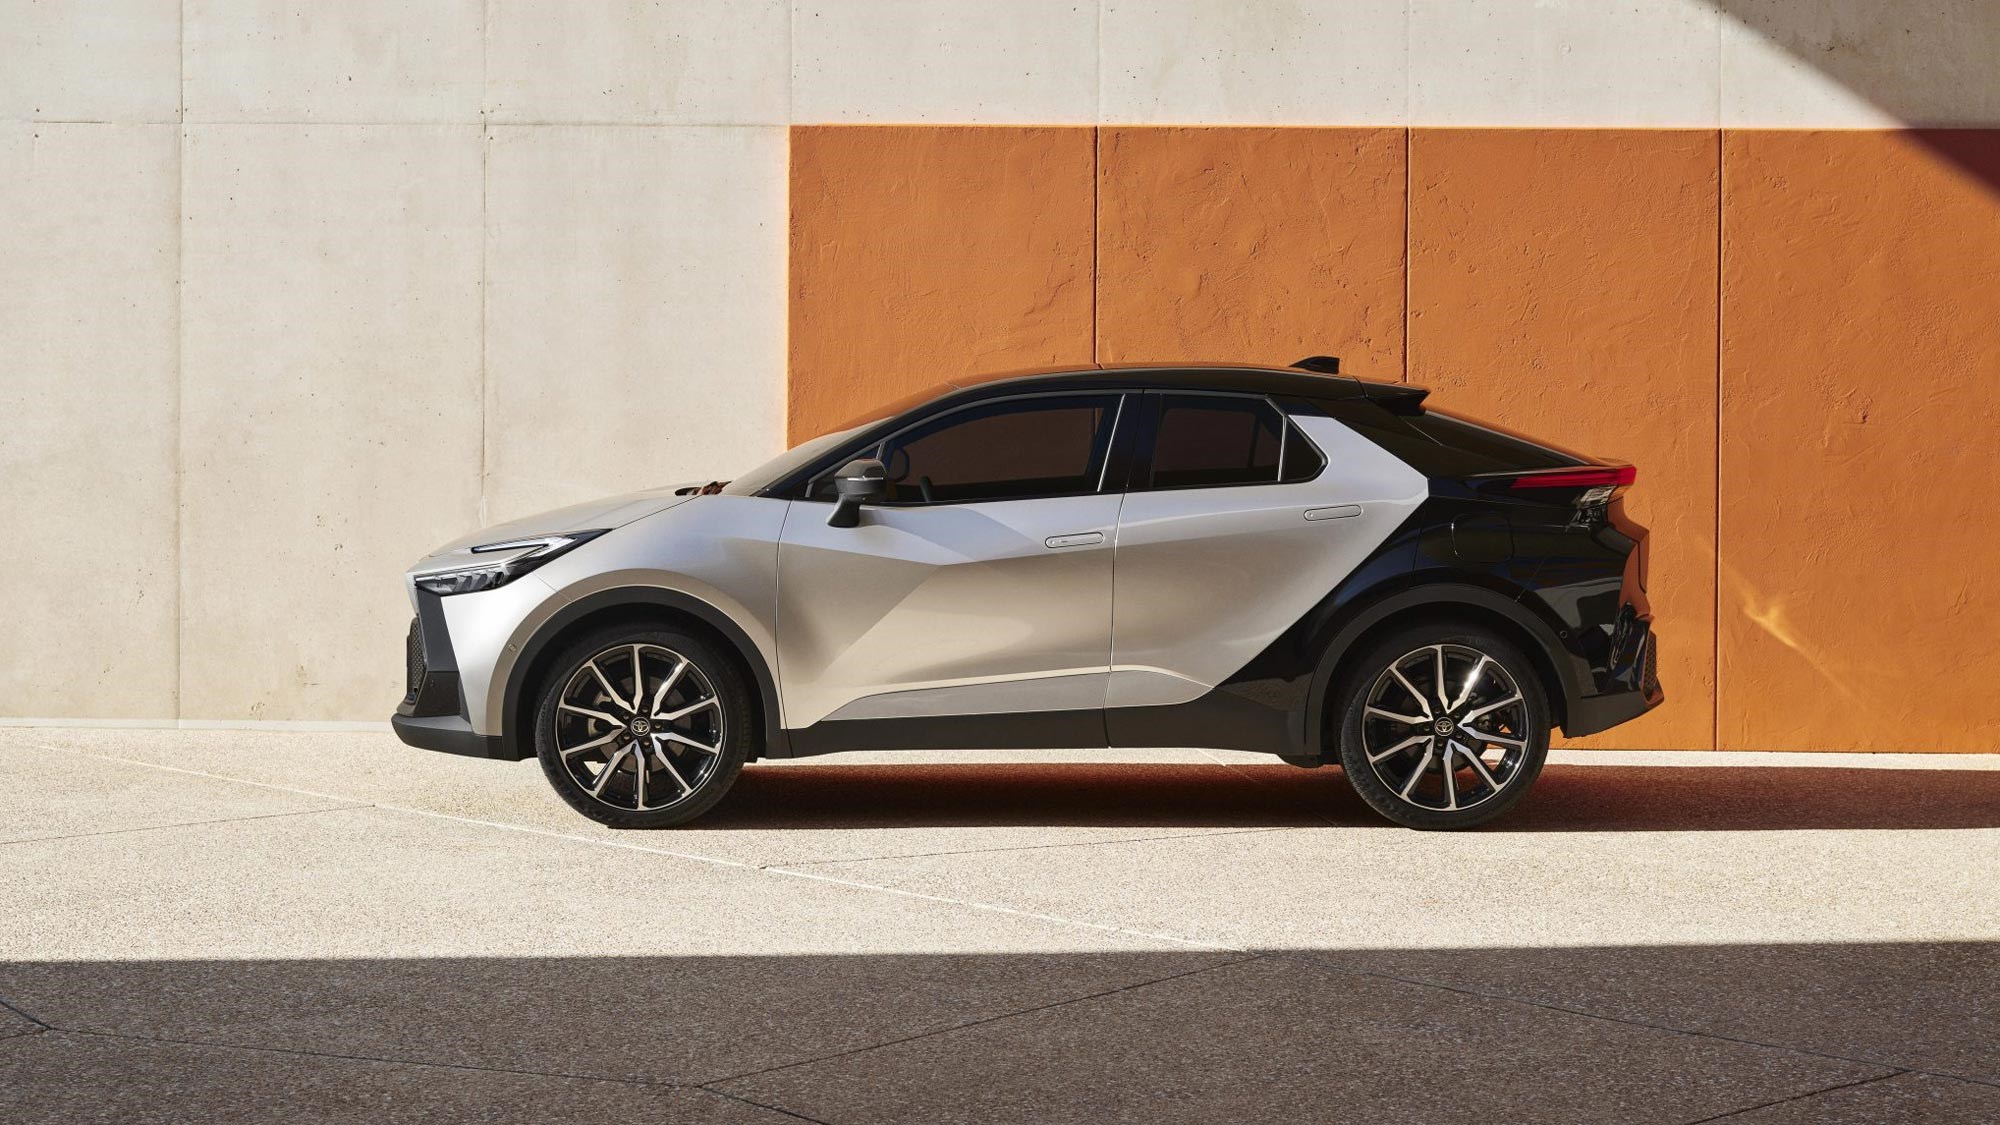 Become part of something new, with the 2022 Toyota C-HR Jan 17, 2022